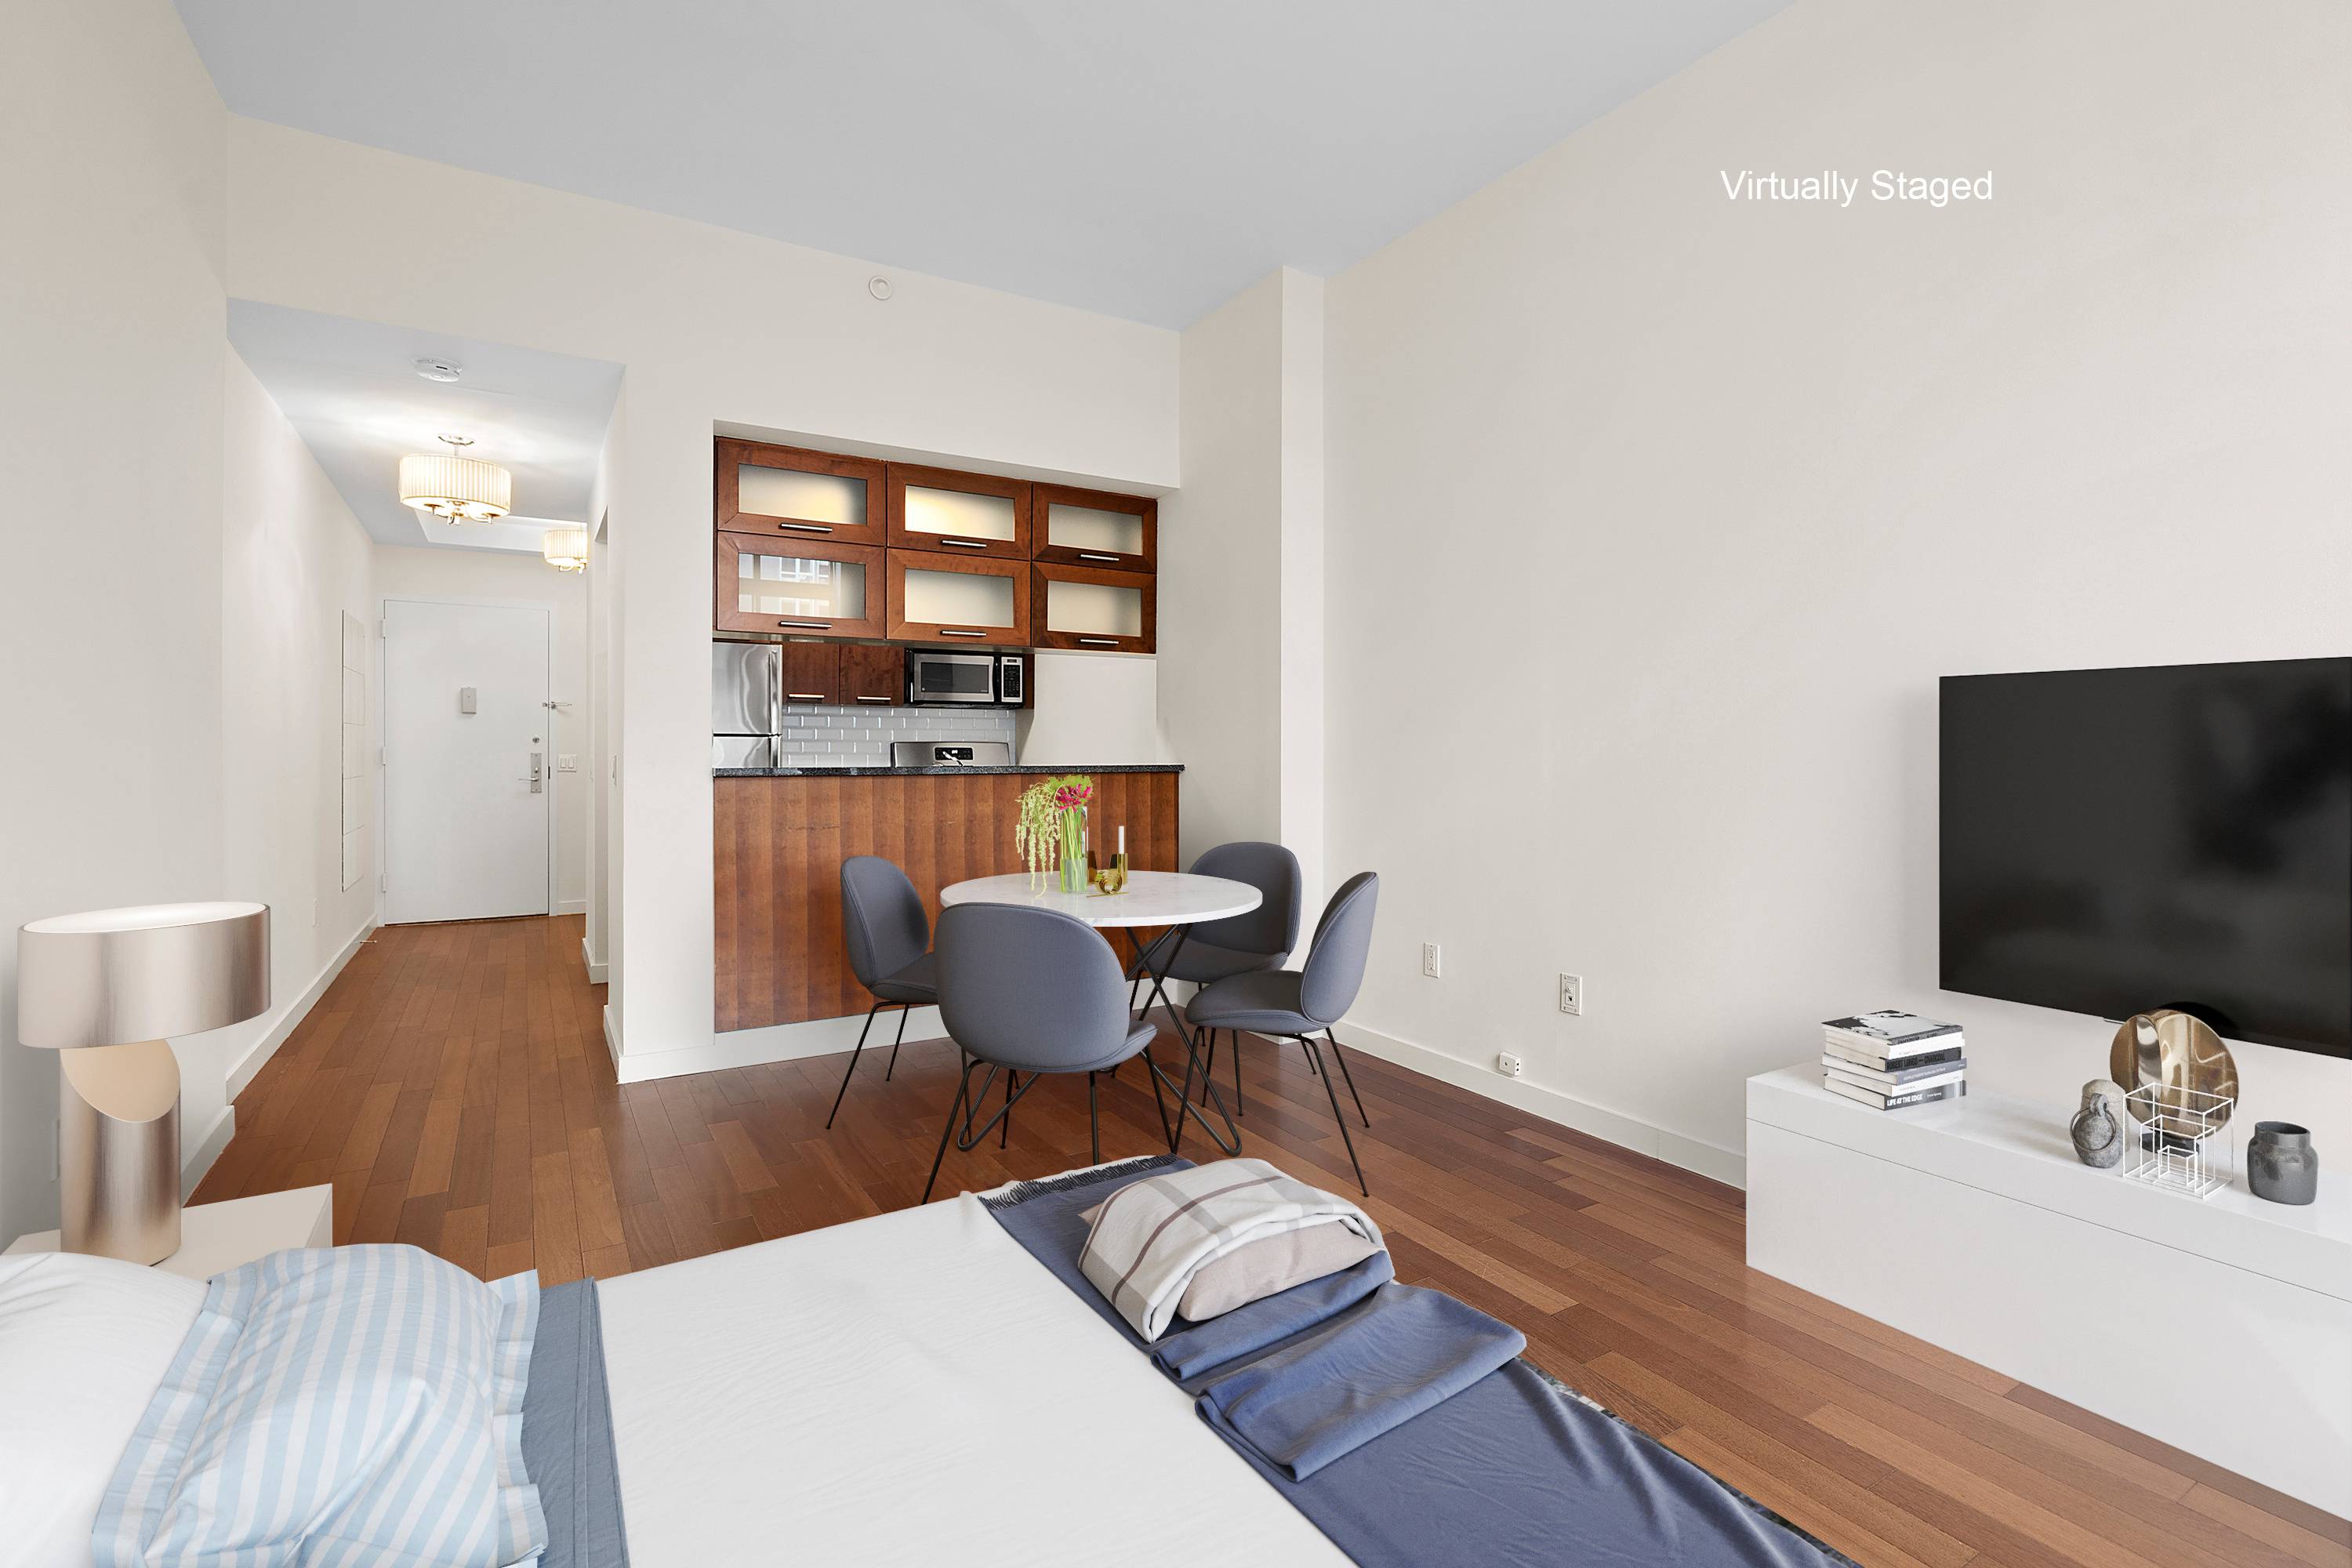 Welcome home to this impressive studio at the ideally located Crossing 23rd condominium.